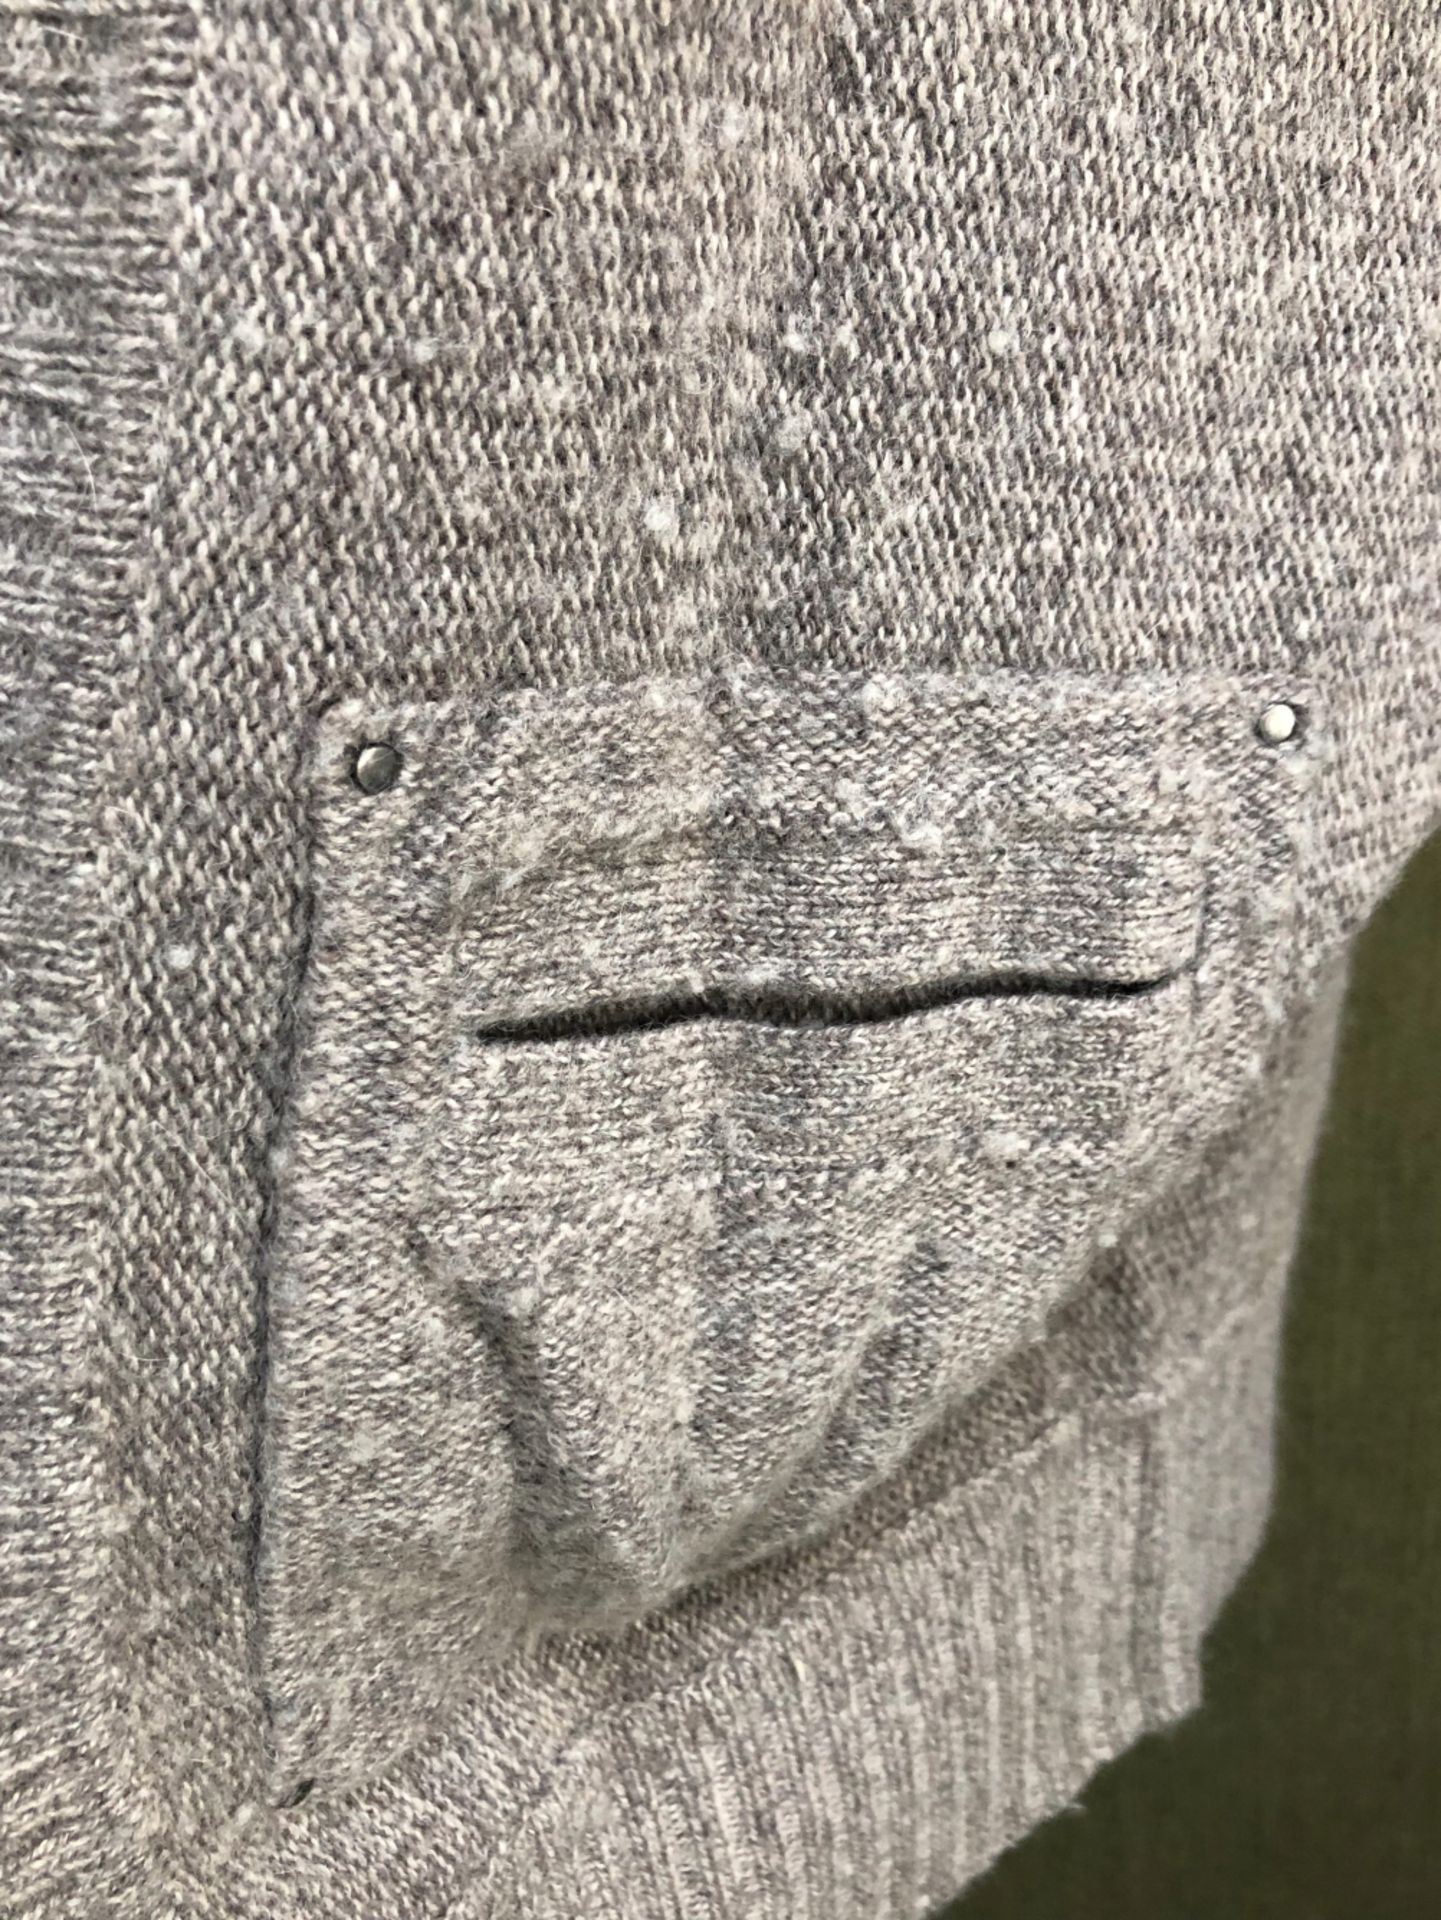 A JOHNSTONS CASHMERE 44" CABLE KNIT CARDIGAN, A KNITTED CARDIGAN WITH NECK TIE, A TSE CASHMERE - Image 9 of 16